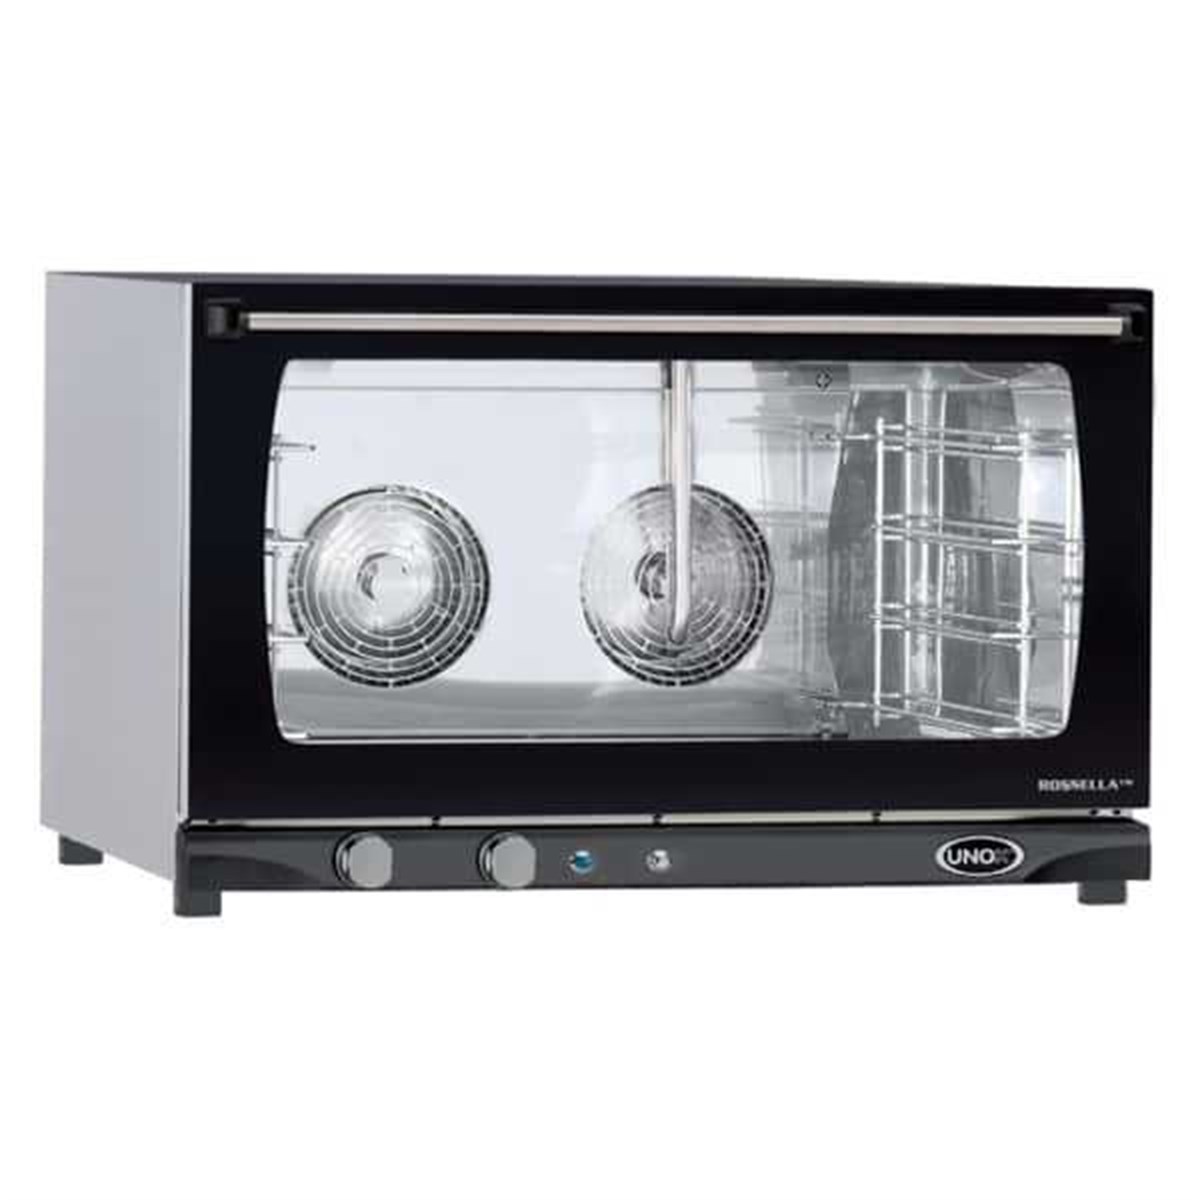 Patisserie Oven 4 Tray Rossella Manual